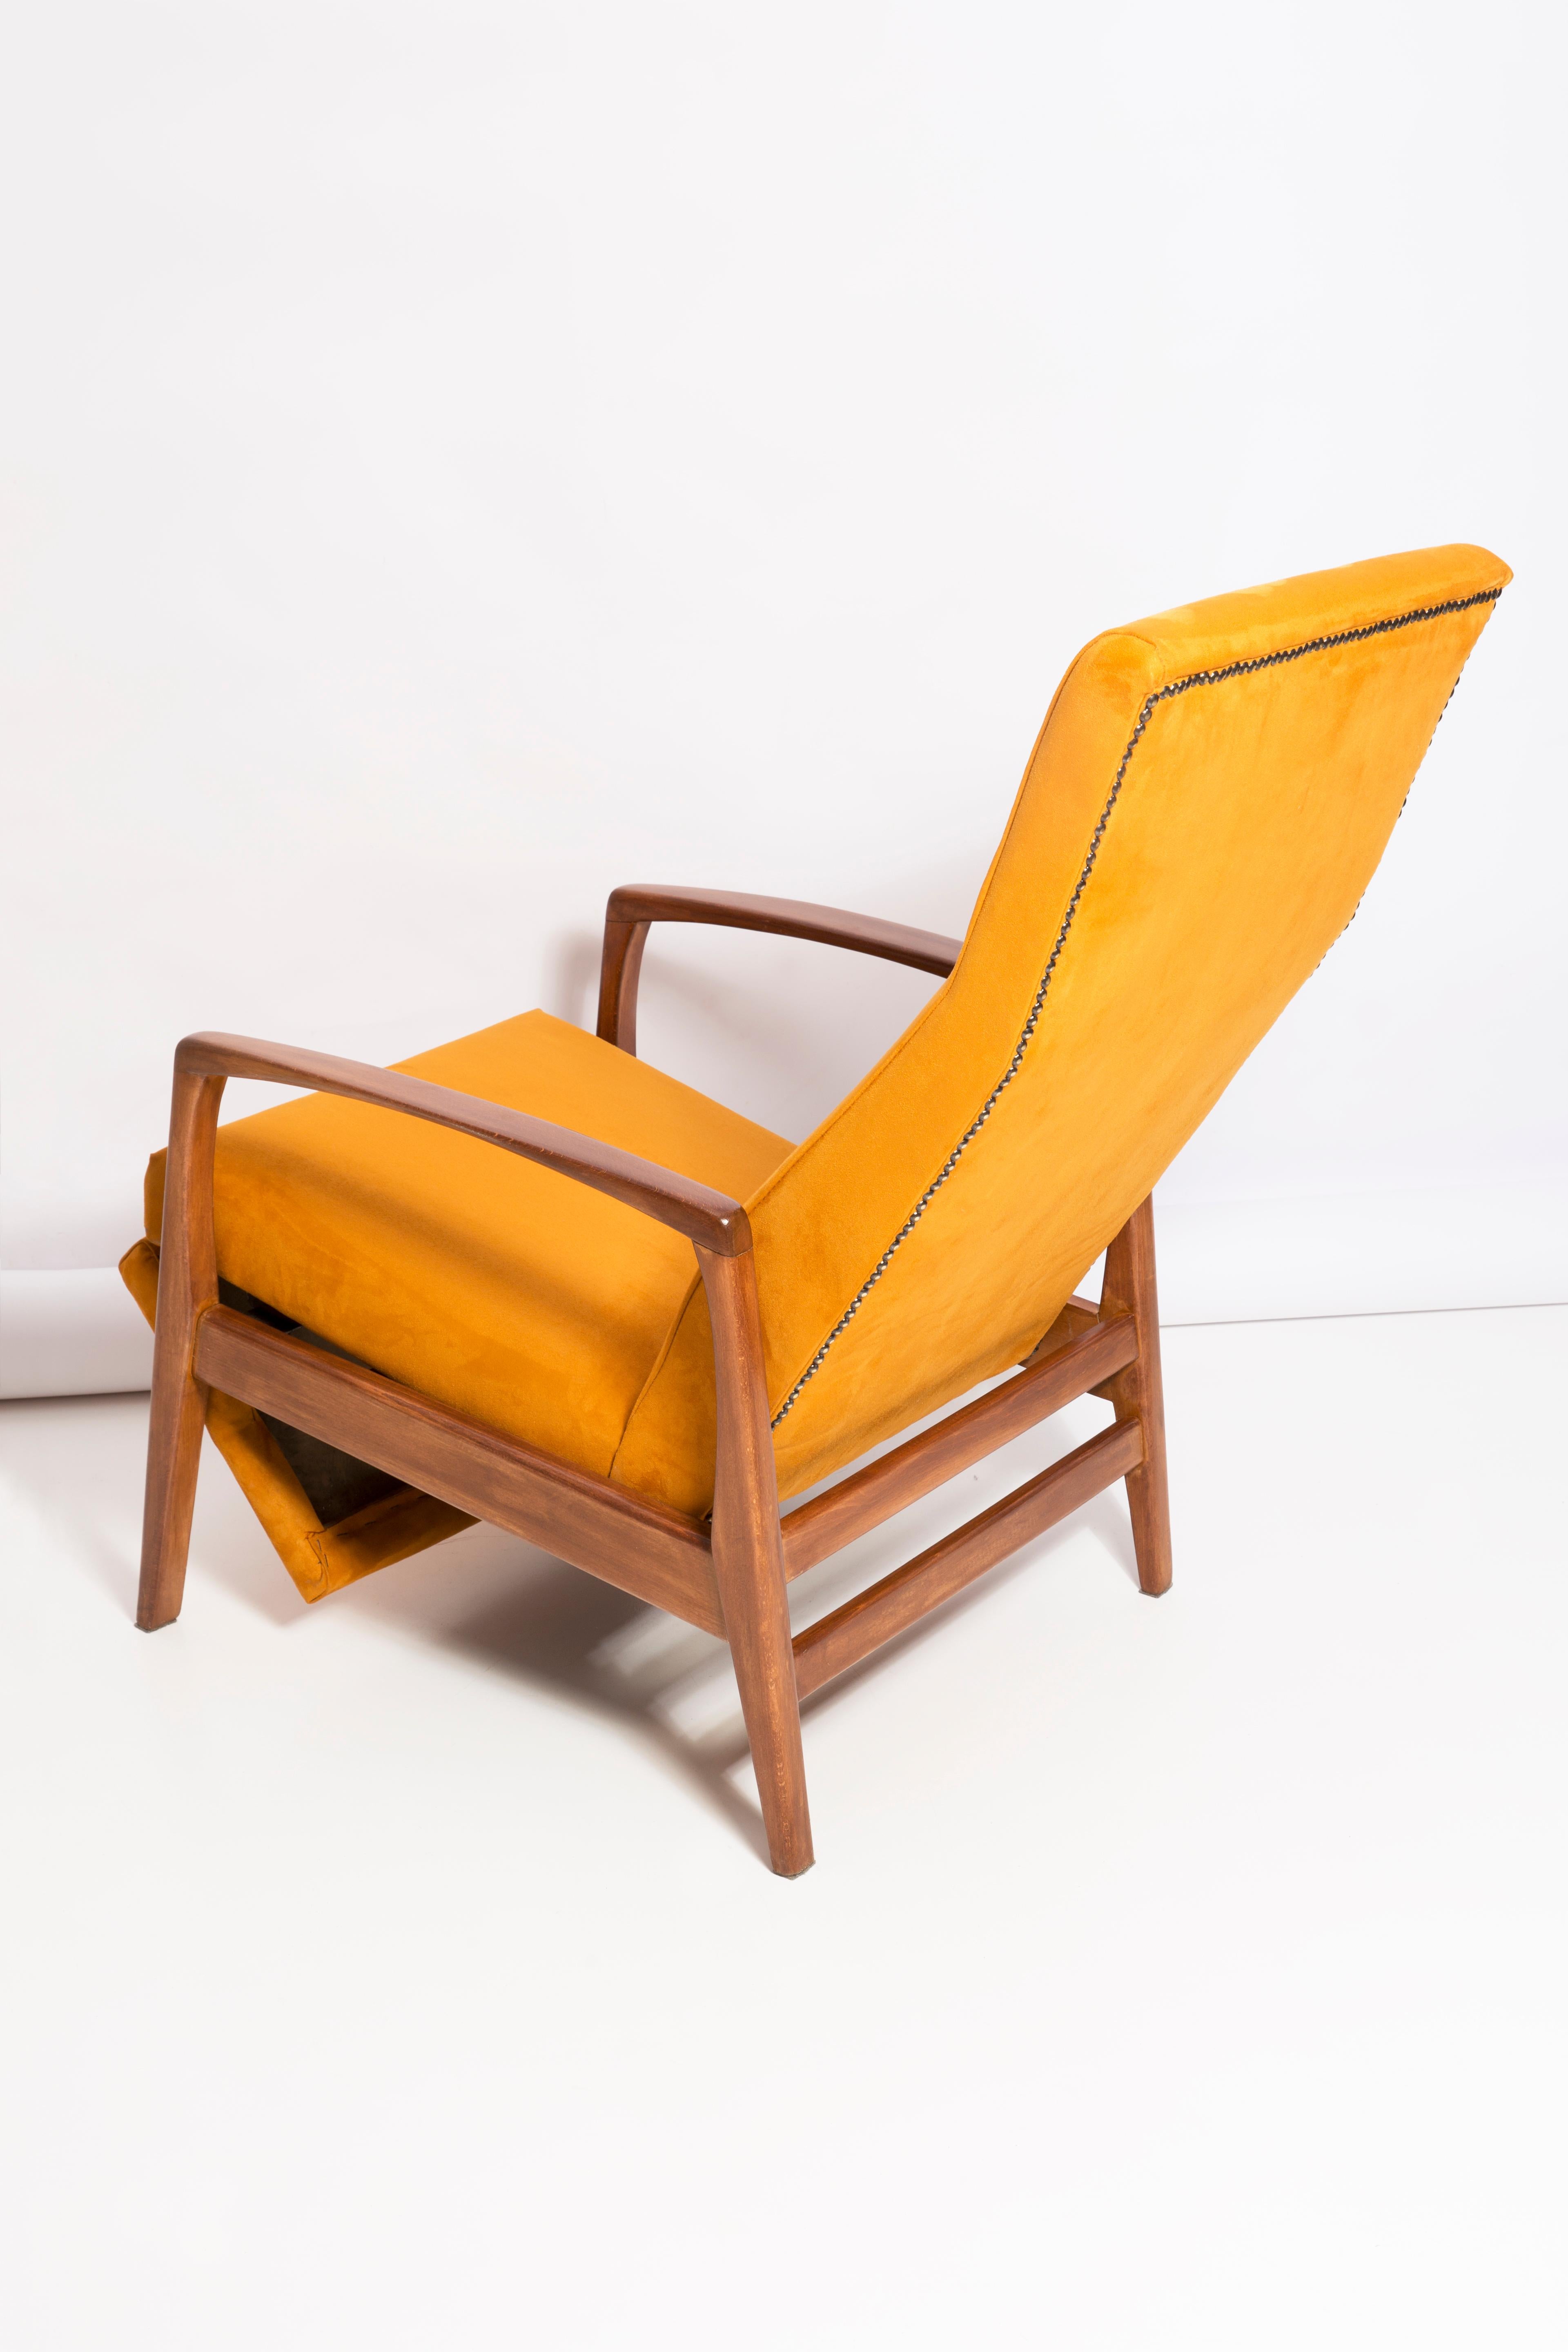 20th Century Yellow Fold-Out Armchair, Europe, 1960s For Sale 12